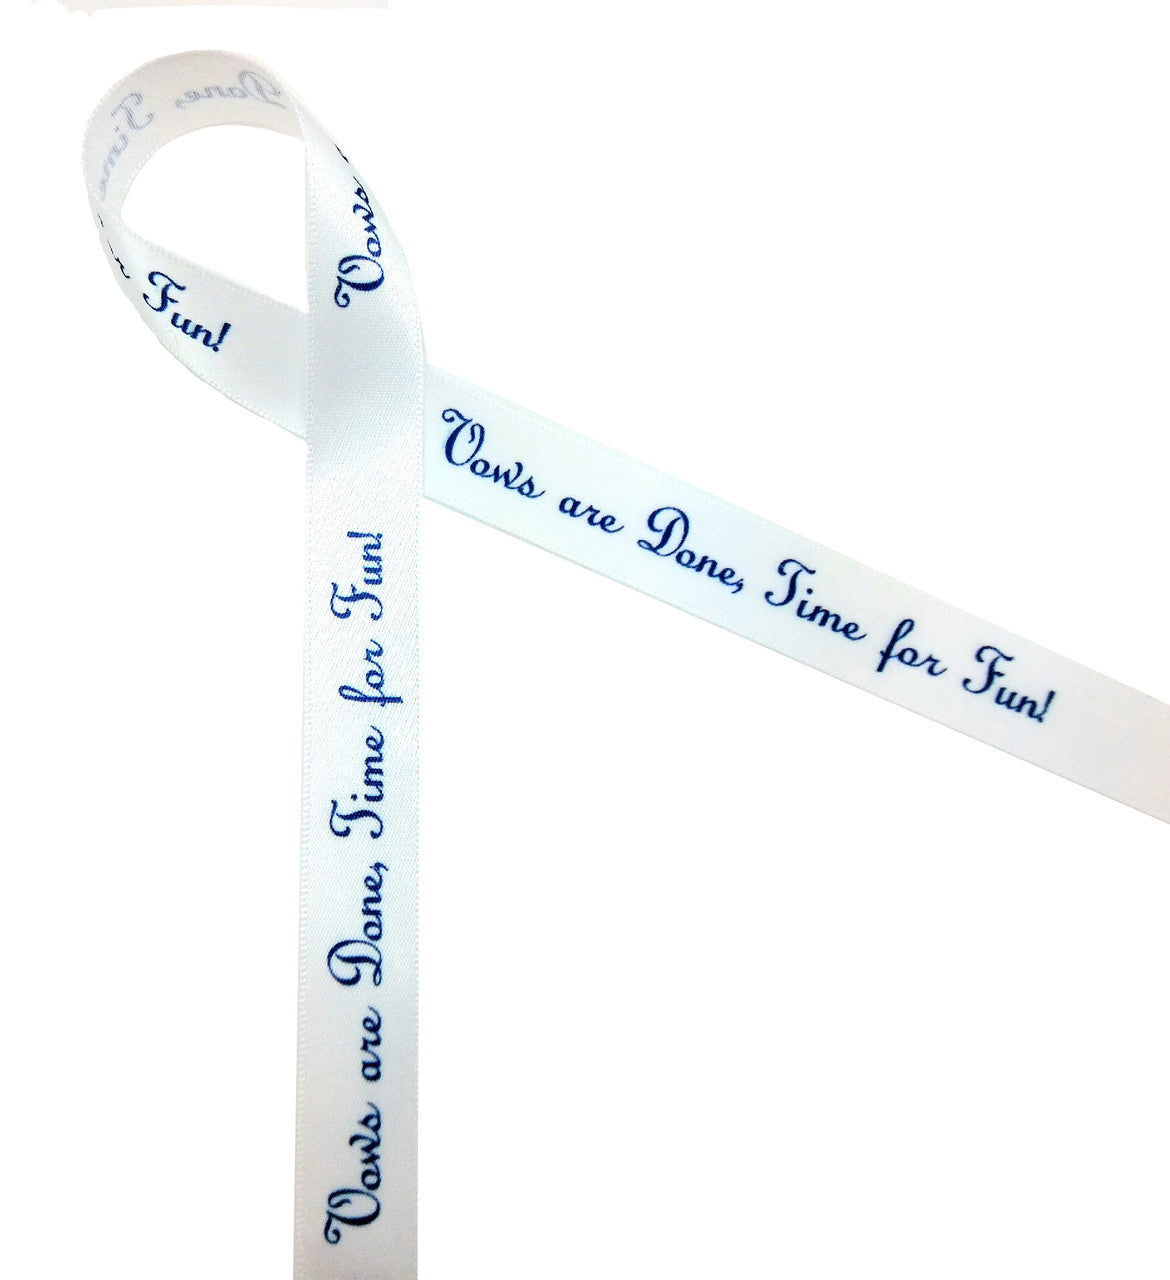 Vows are Done Time for Fun! Ribbon Navy Blue ink on 5/8"wide White Satin Ribbon